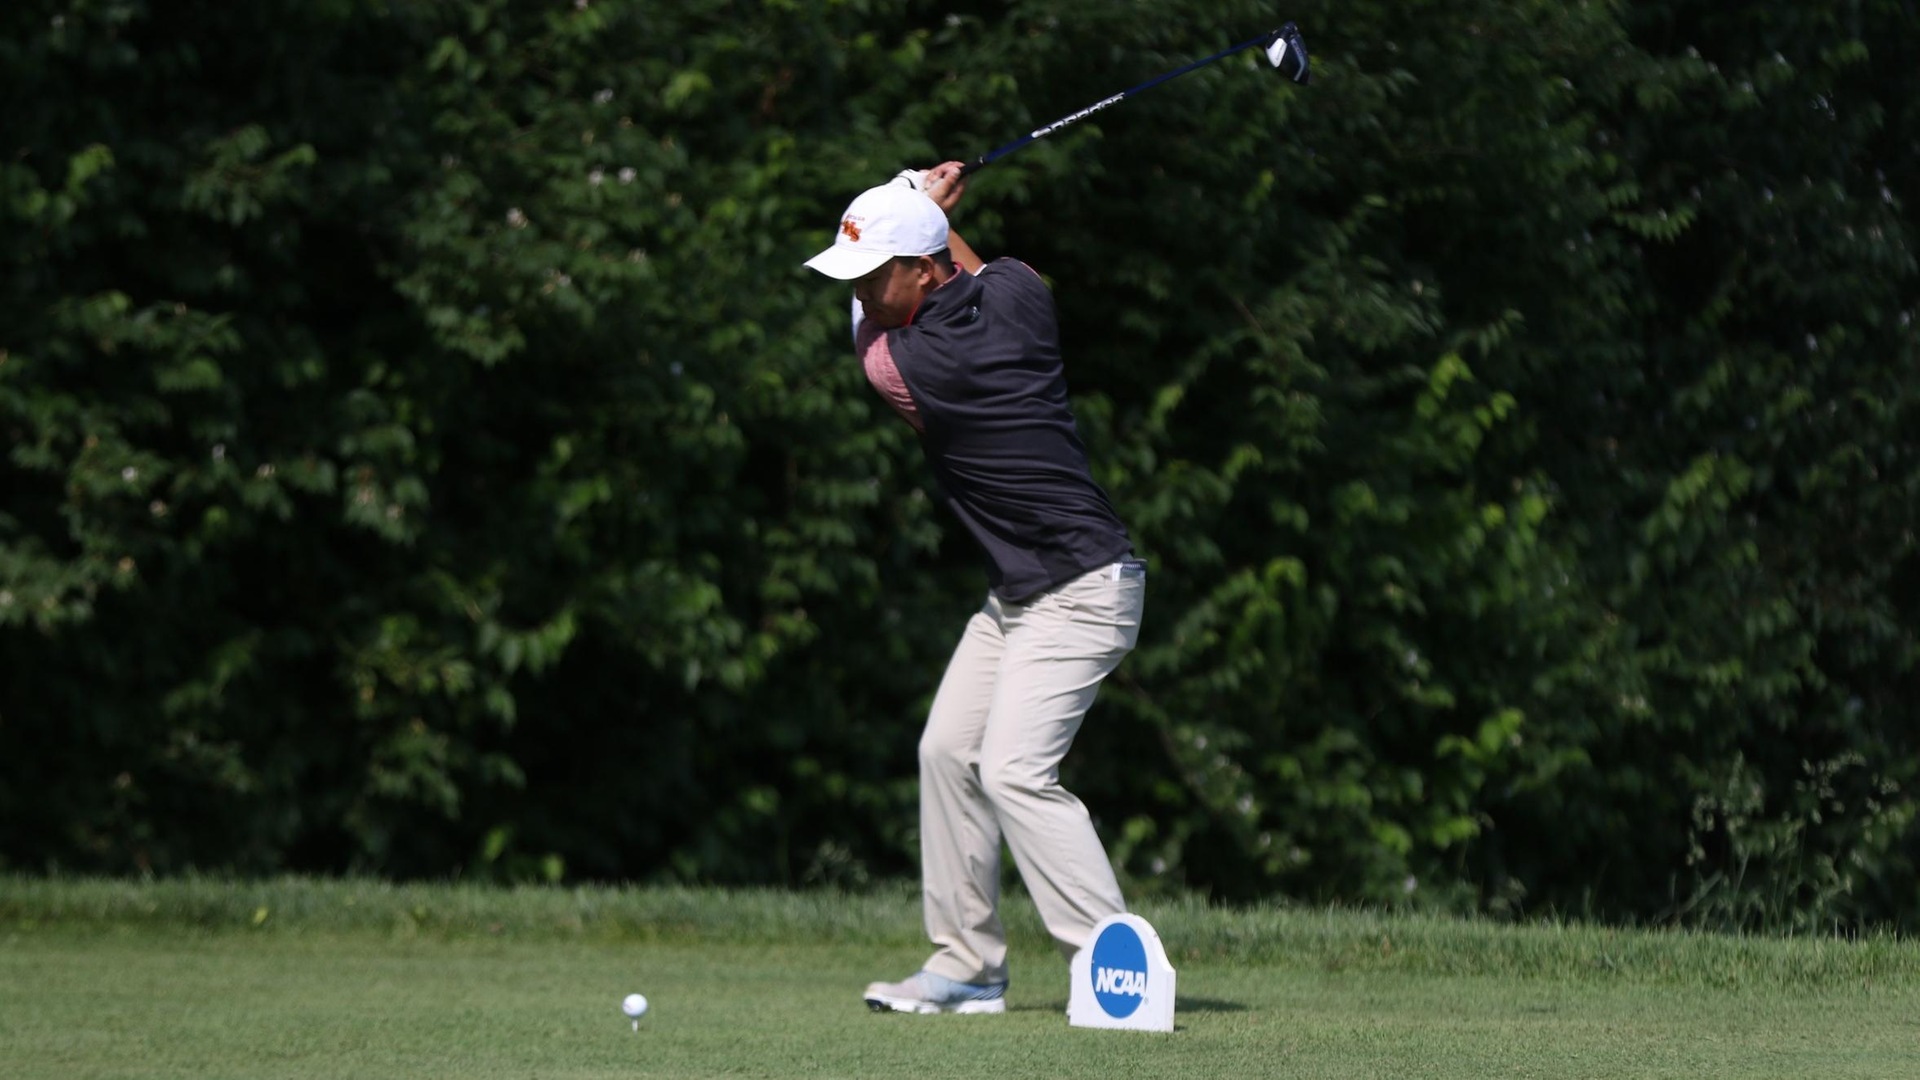 Mason Chiu stands at -4 after two straight 70s